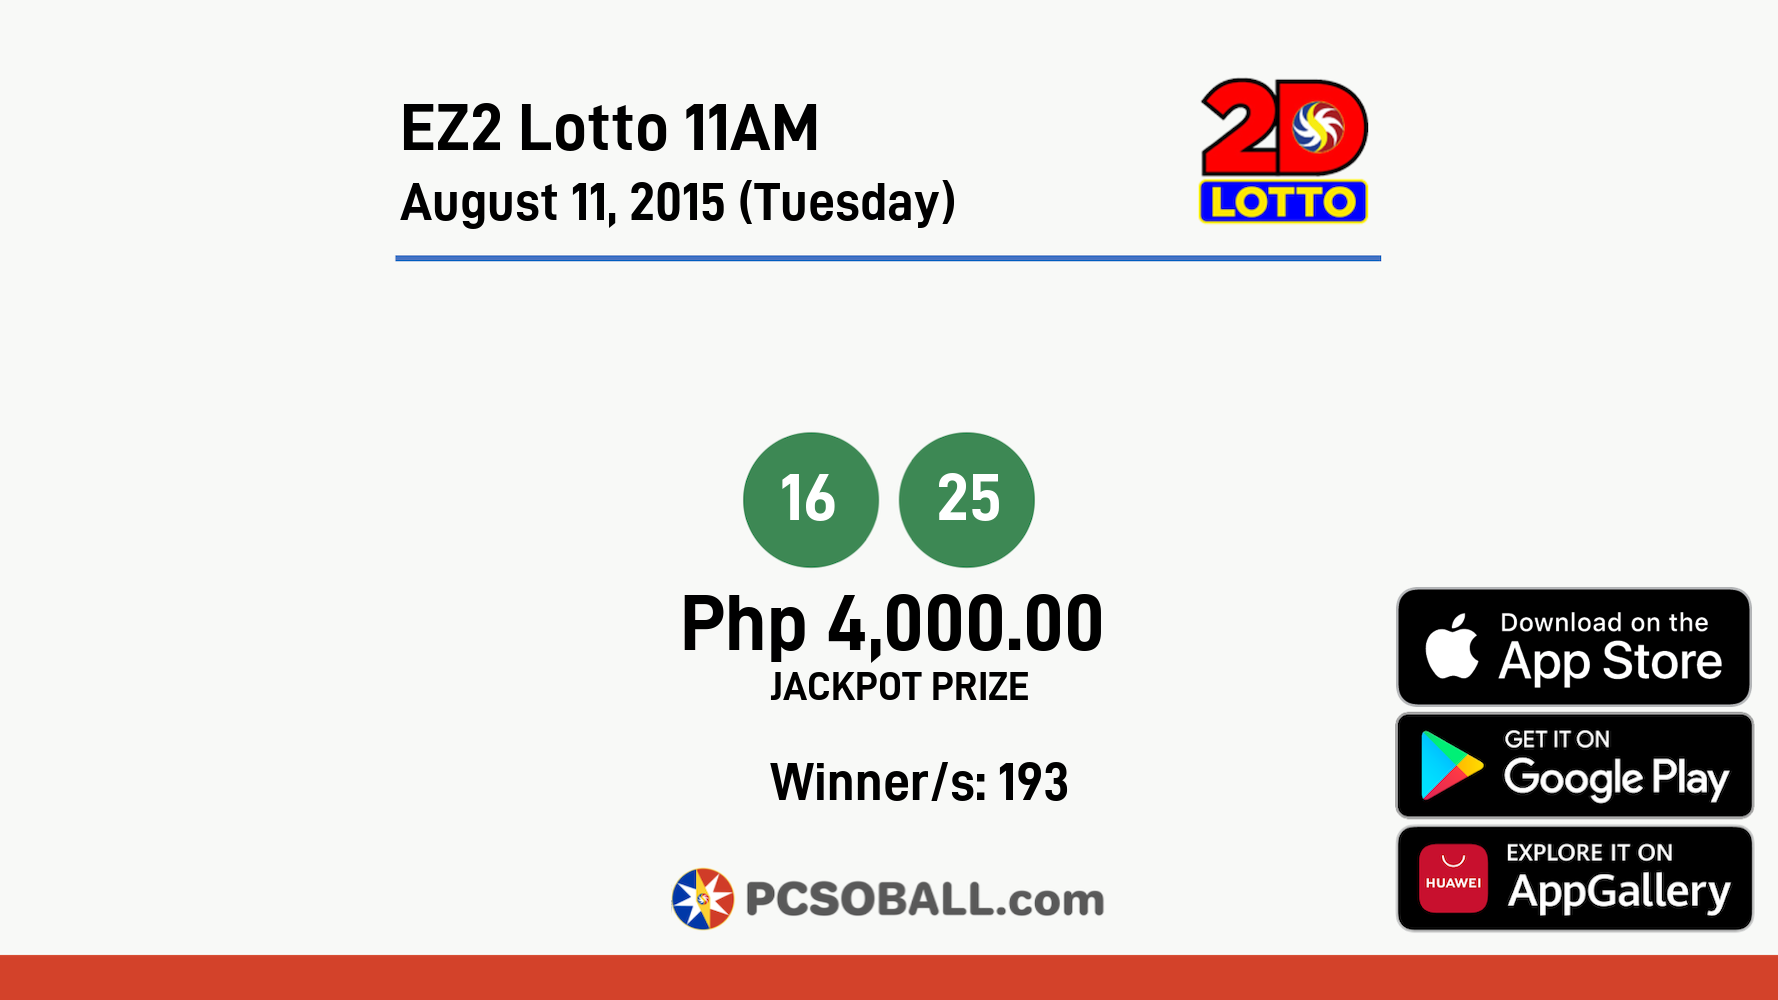 EZ2 Lotto 11AM August 11, 2015 (Tuesday) Result